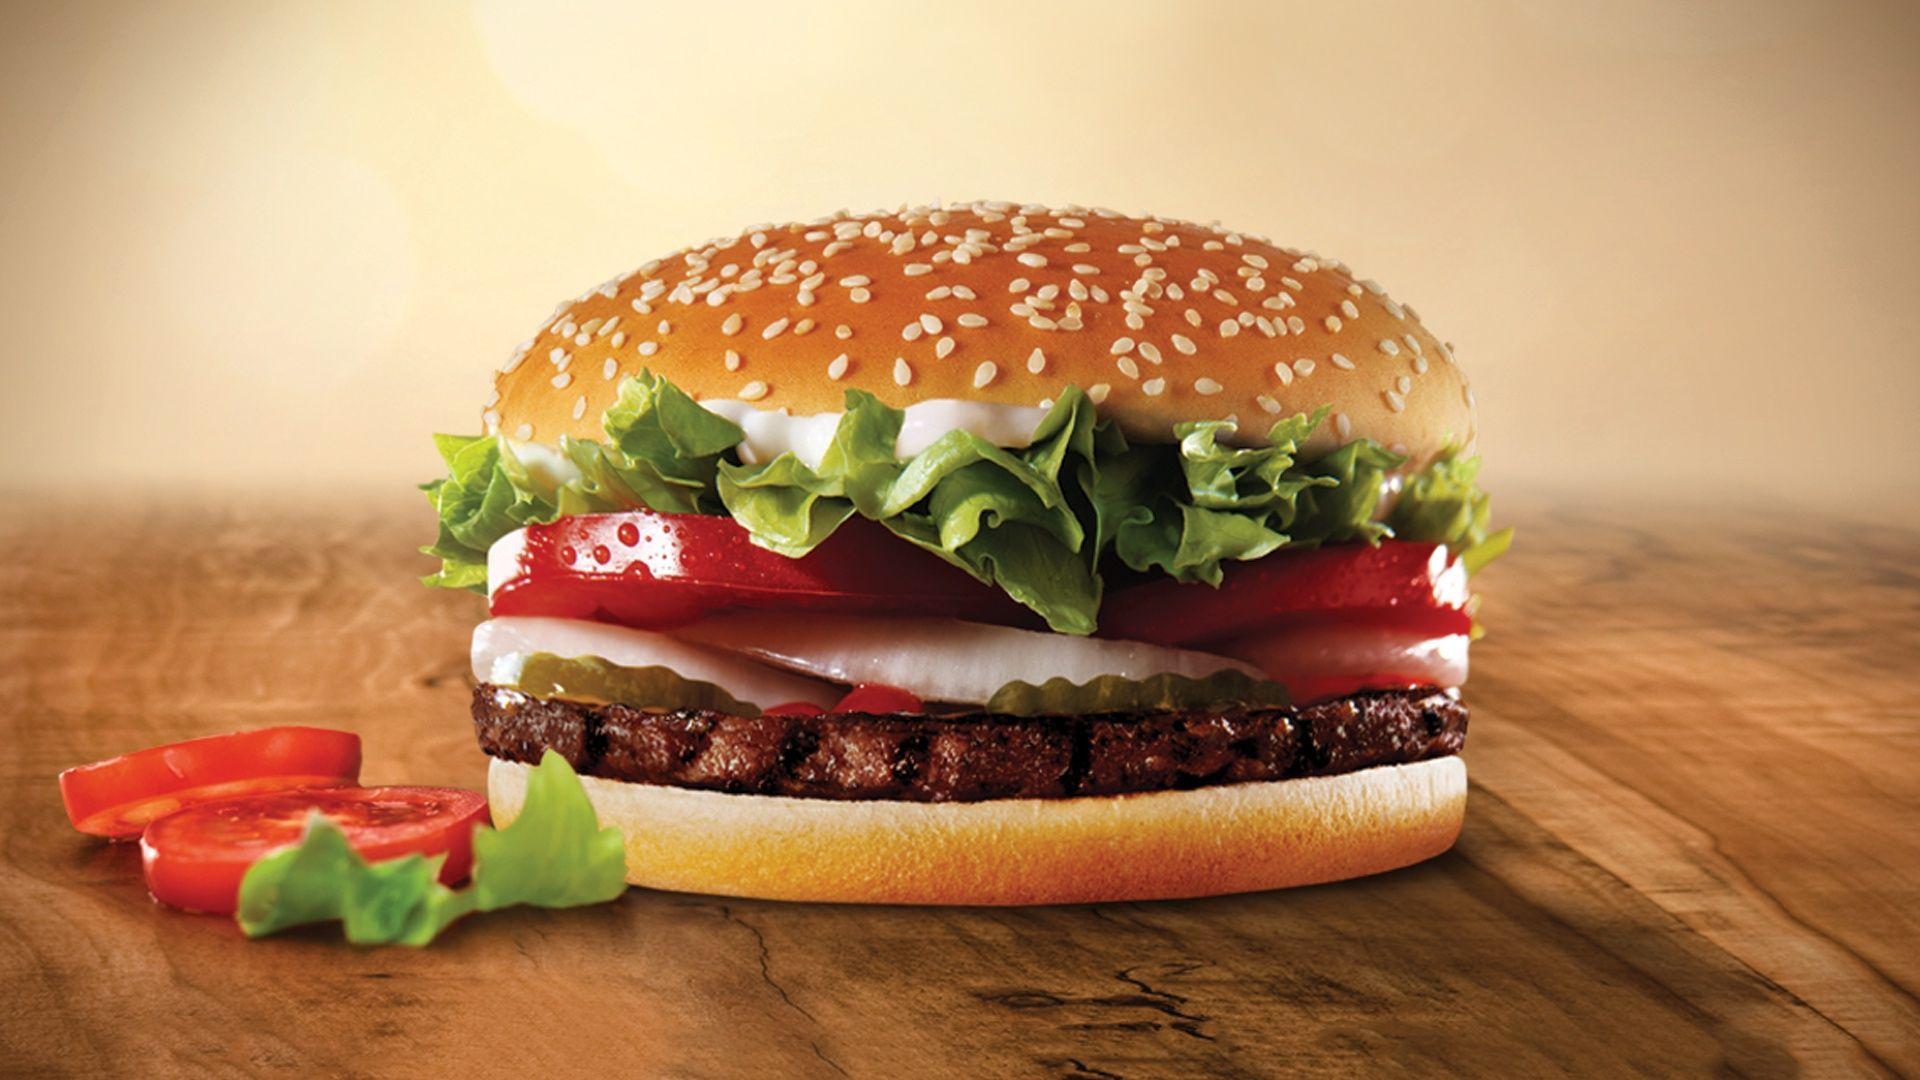 Burger King Thailand Joins PlantBased Whopper Bandwagon With Aussie Alt  Meat Player v2food